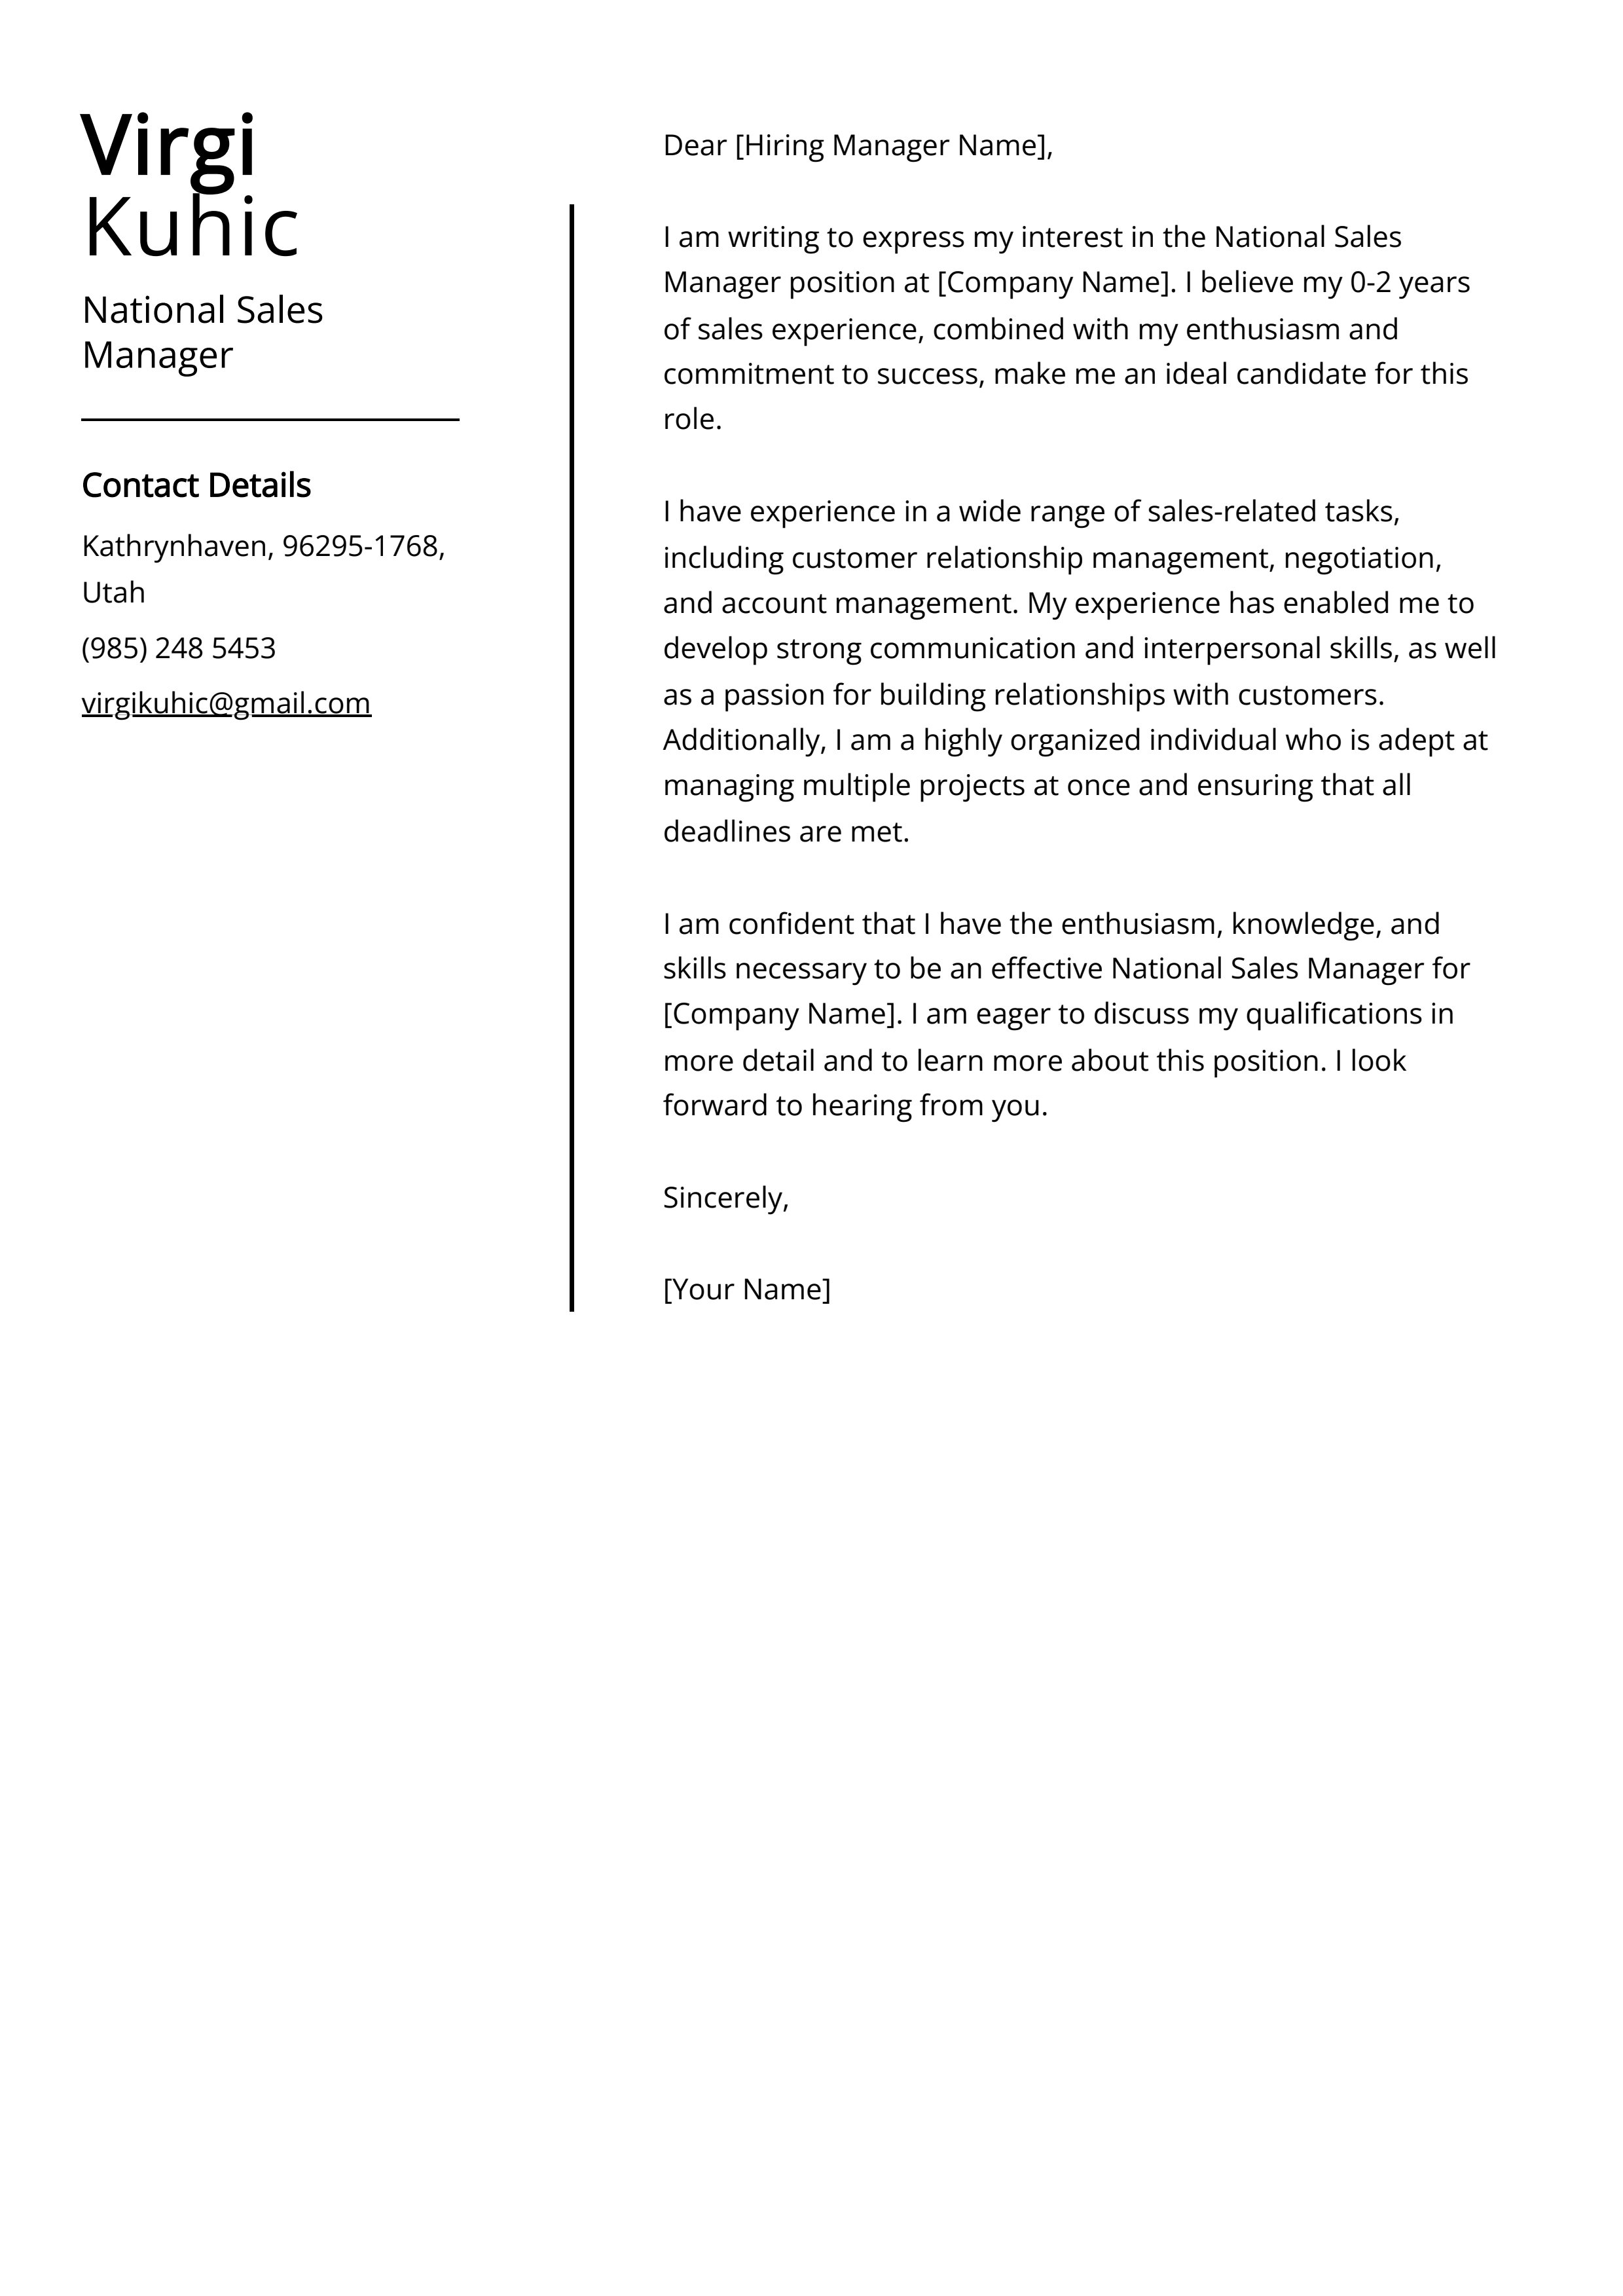 National Sales Manager Cover Letter Example